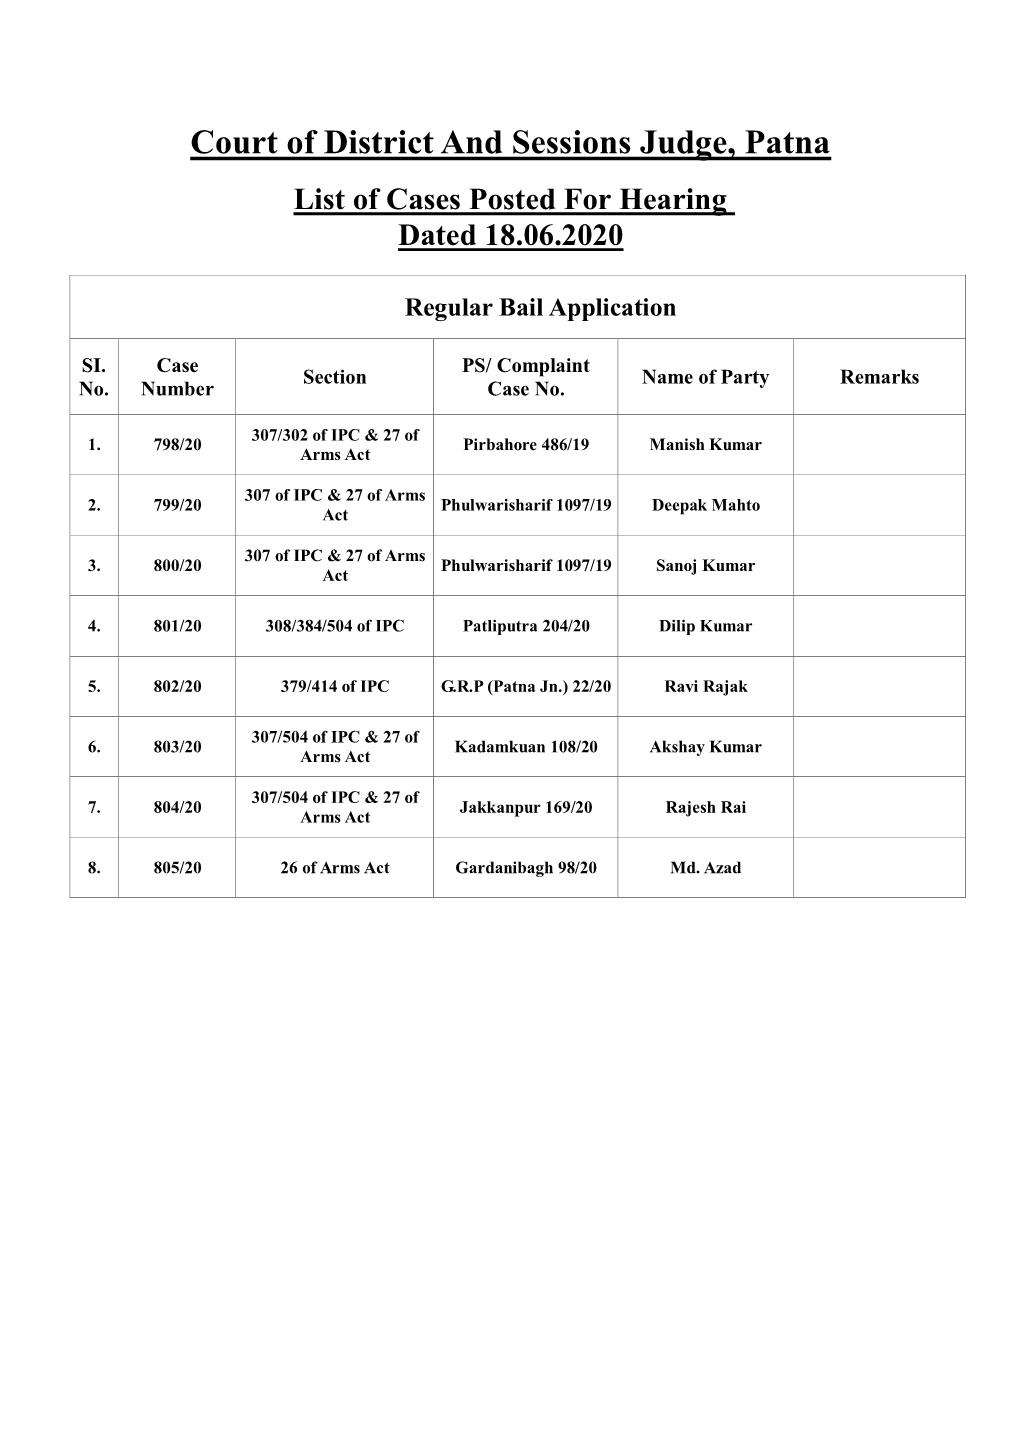 Court of District and Sessions Judge, Patna List of Cases Posted for Hearing Dated 18.06.2020